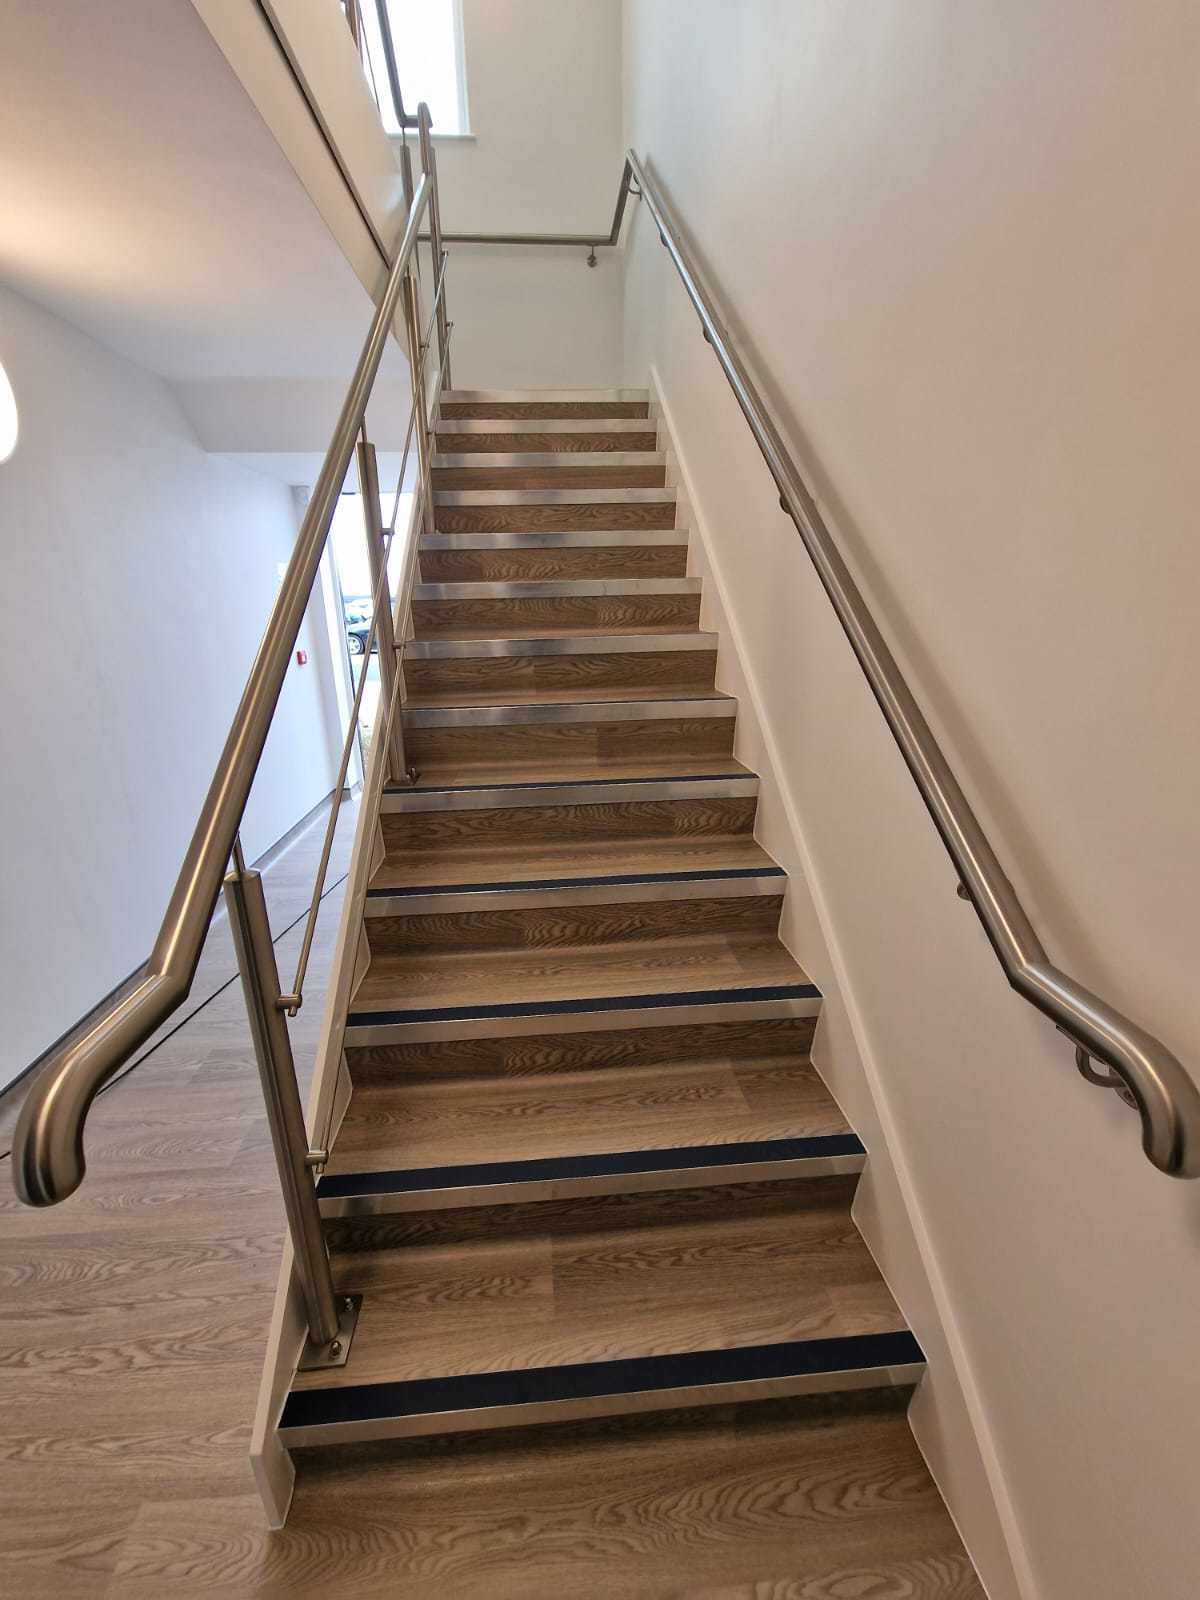 Stainless Steel Stair Balustrade and Handrail